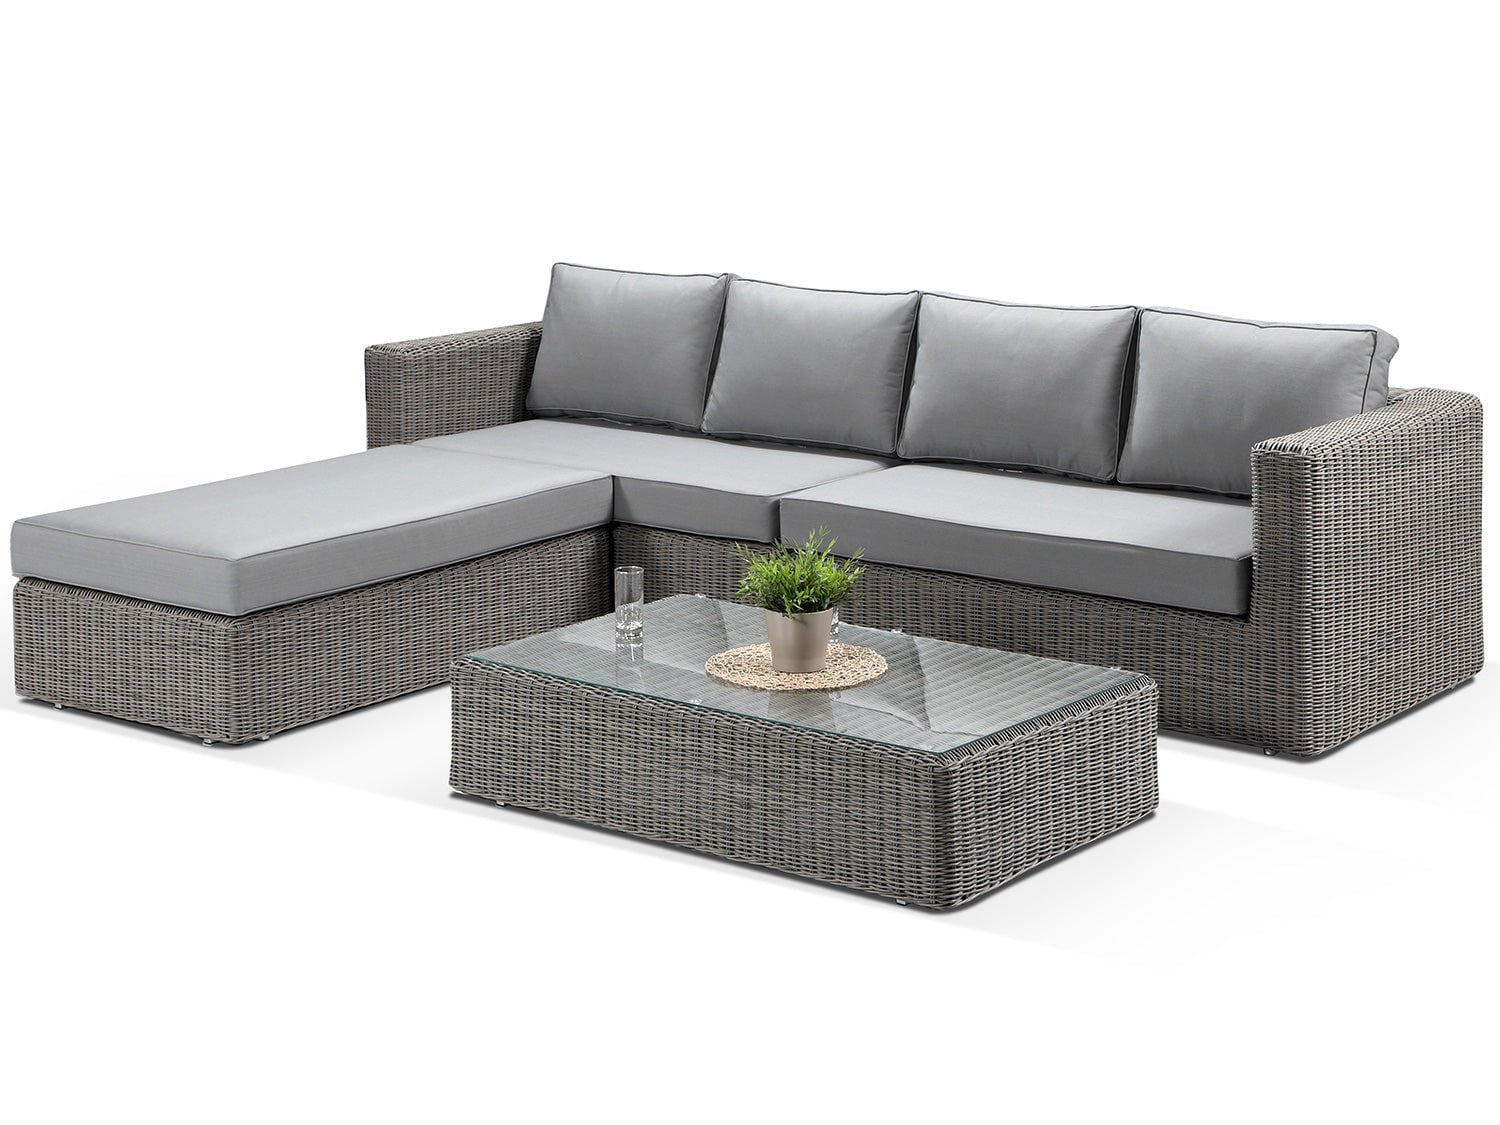 Alexander Francis Garden Furniture Winter Covers Tosca Daybed Winter Covers